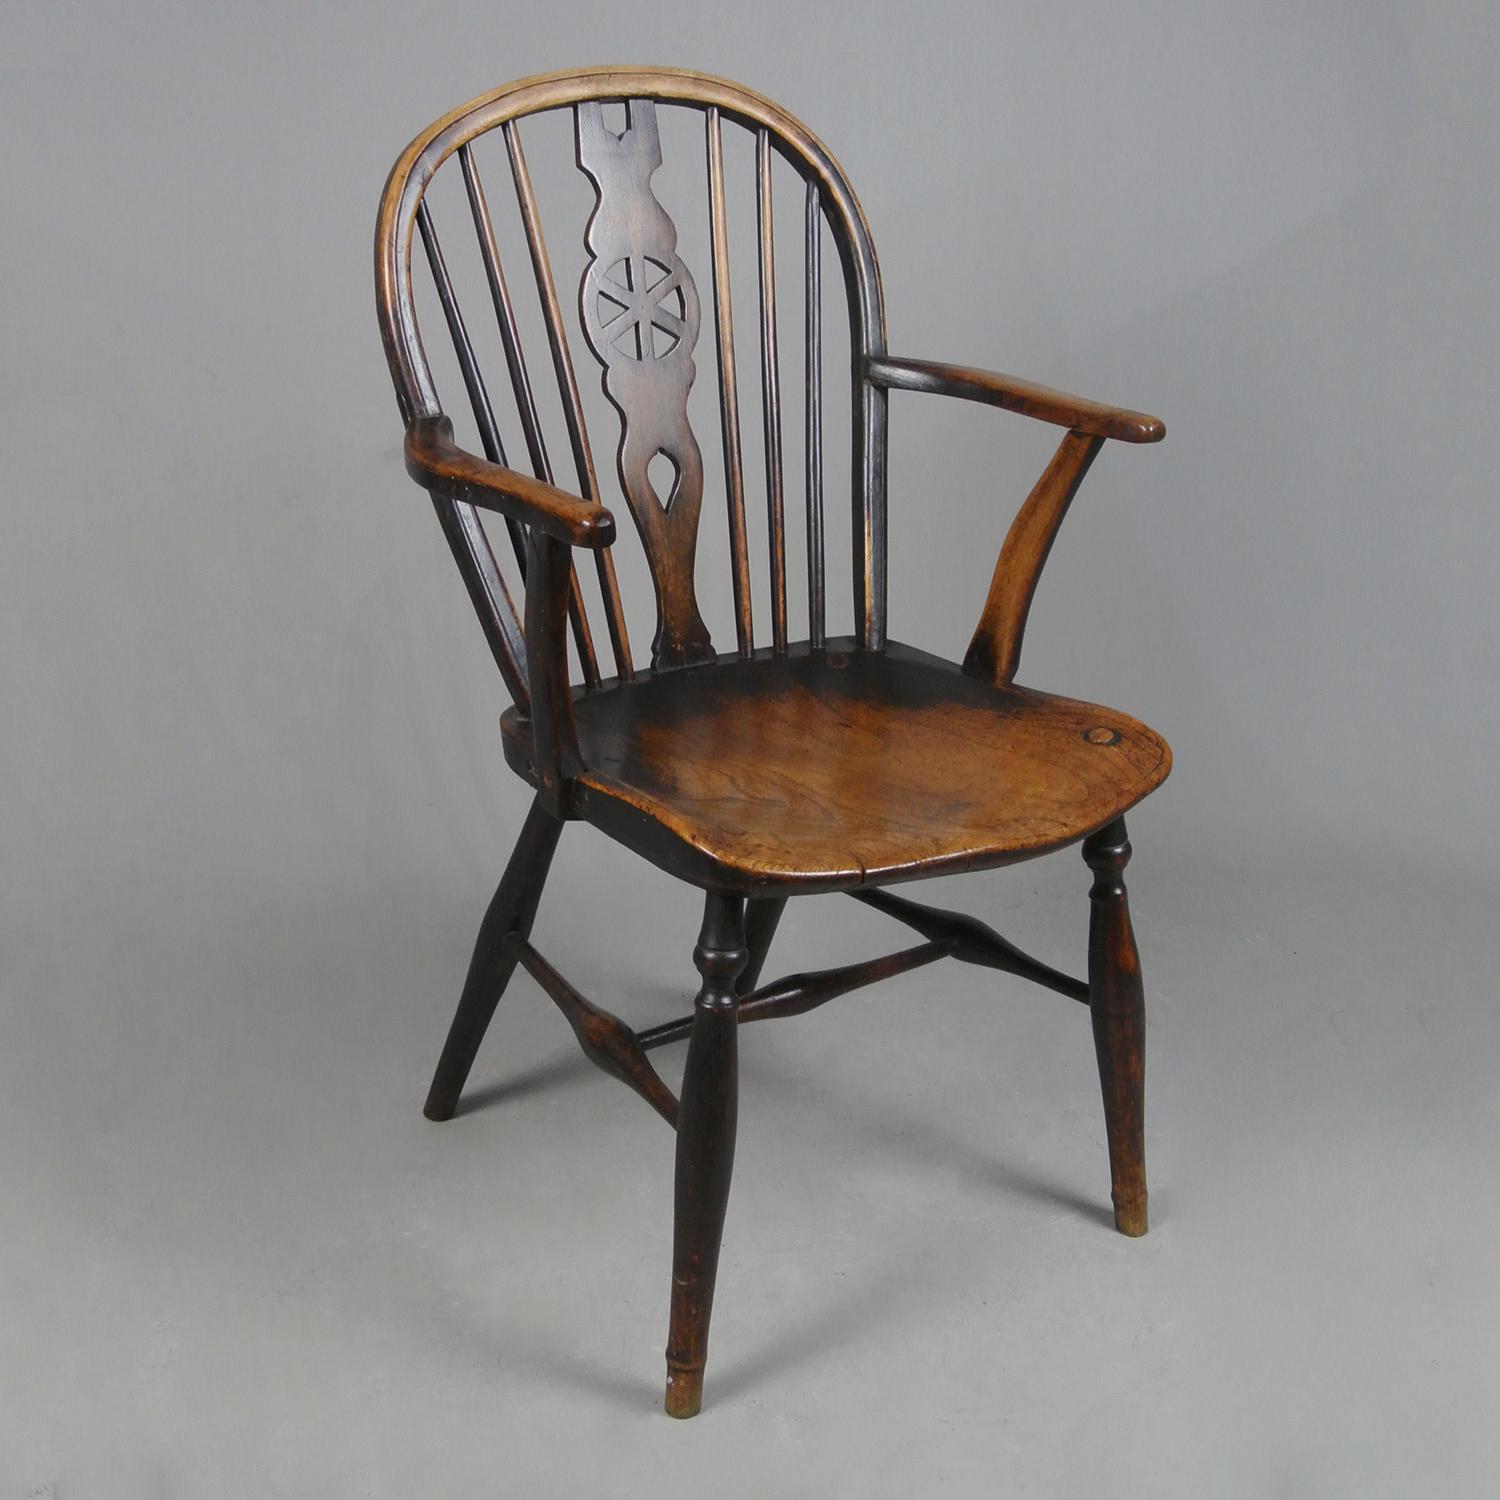 A very good, sturdy and fine example of a low back 18th century wheel back Windsor chair with a really fantastic and naturally developed colour and patina. High Wycombe and c. 1780  

The saddle seat in elm, the hoop, legs, spindles and stretchers